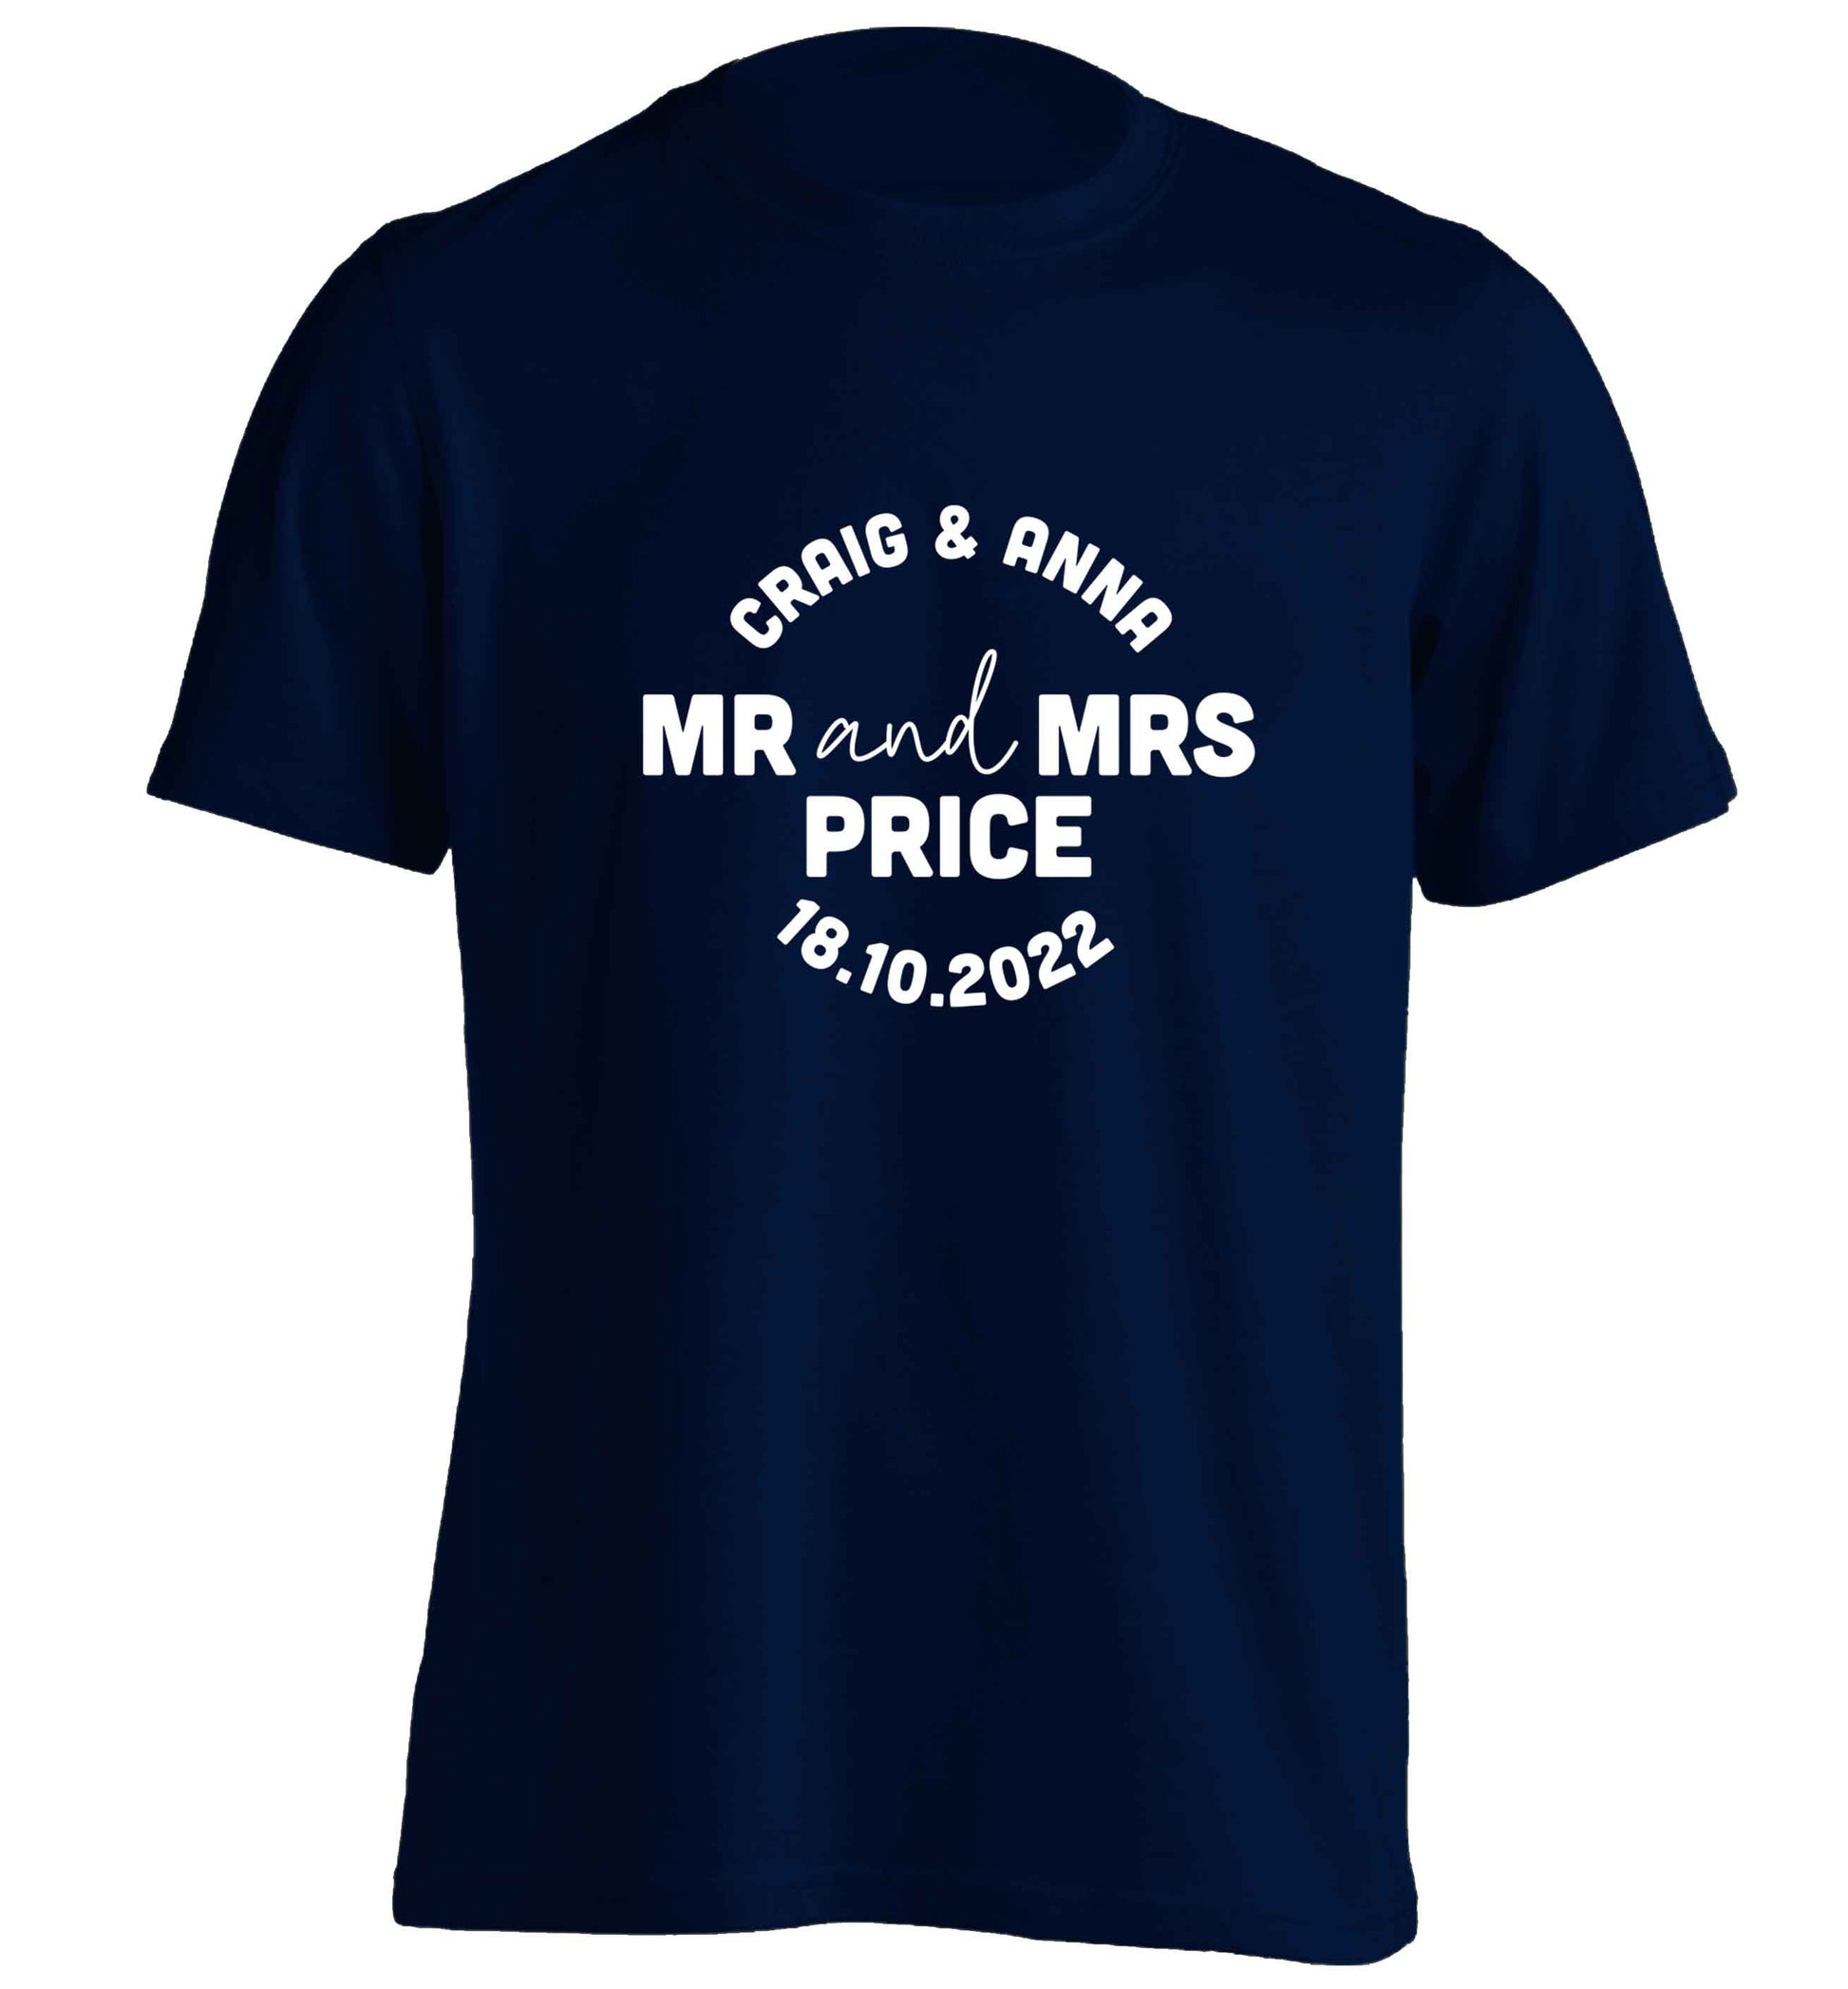 Personalised Mr and Mrs wedding and date! Ideal wedding favours! adults unisex navy Tshirt 2XL